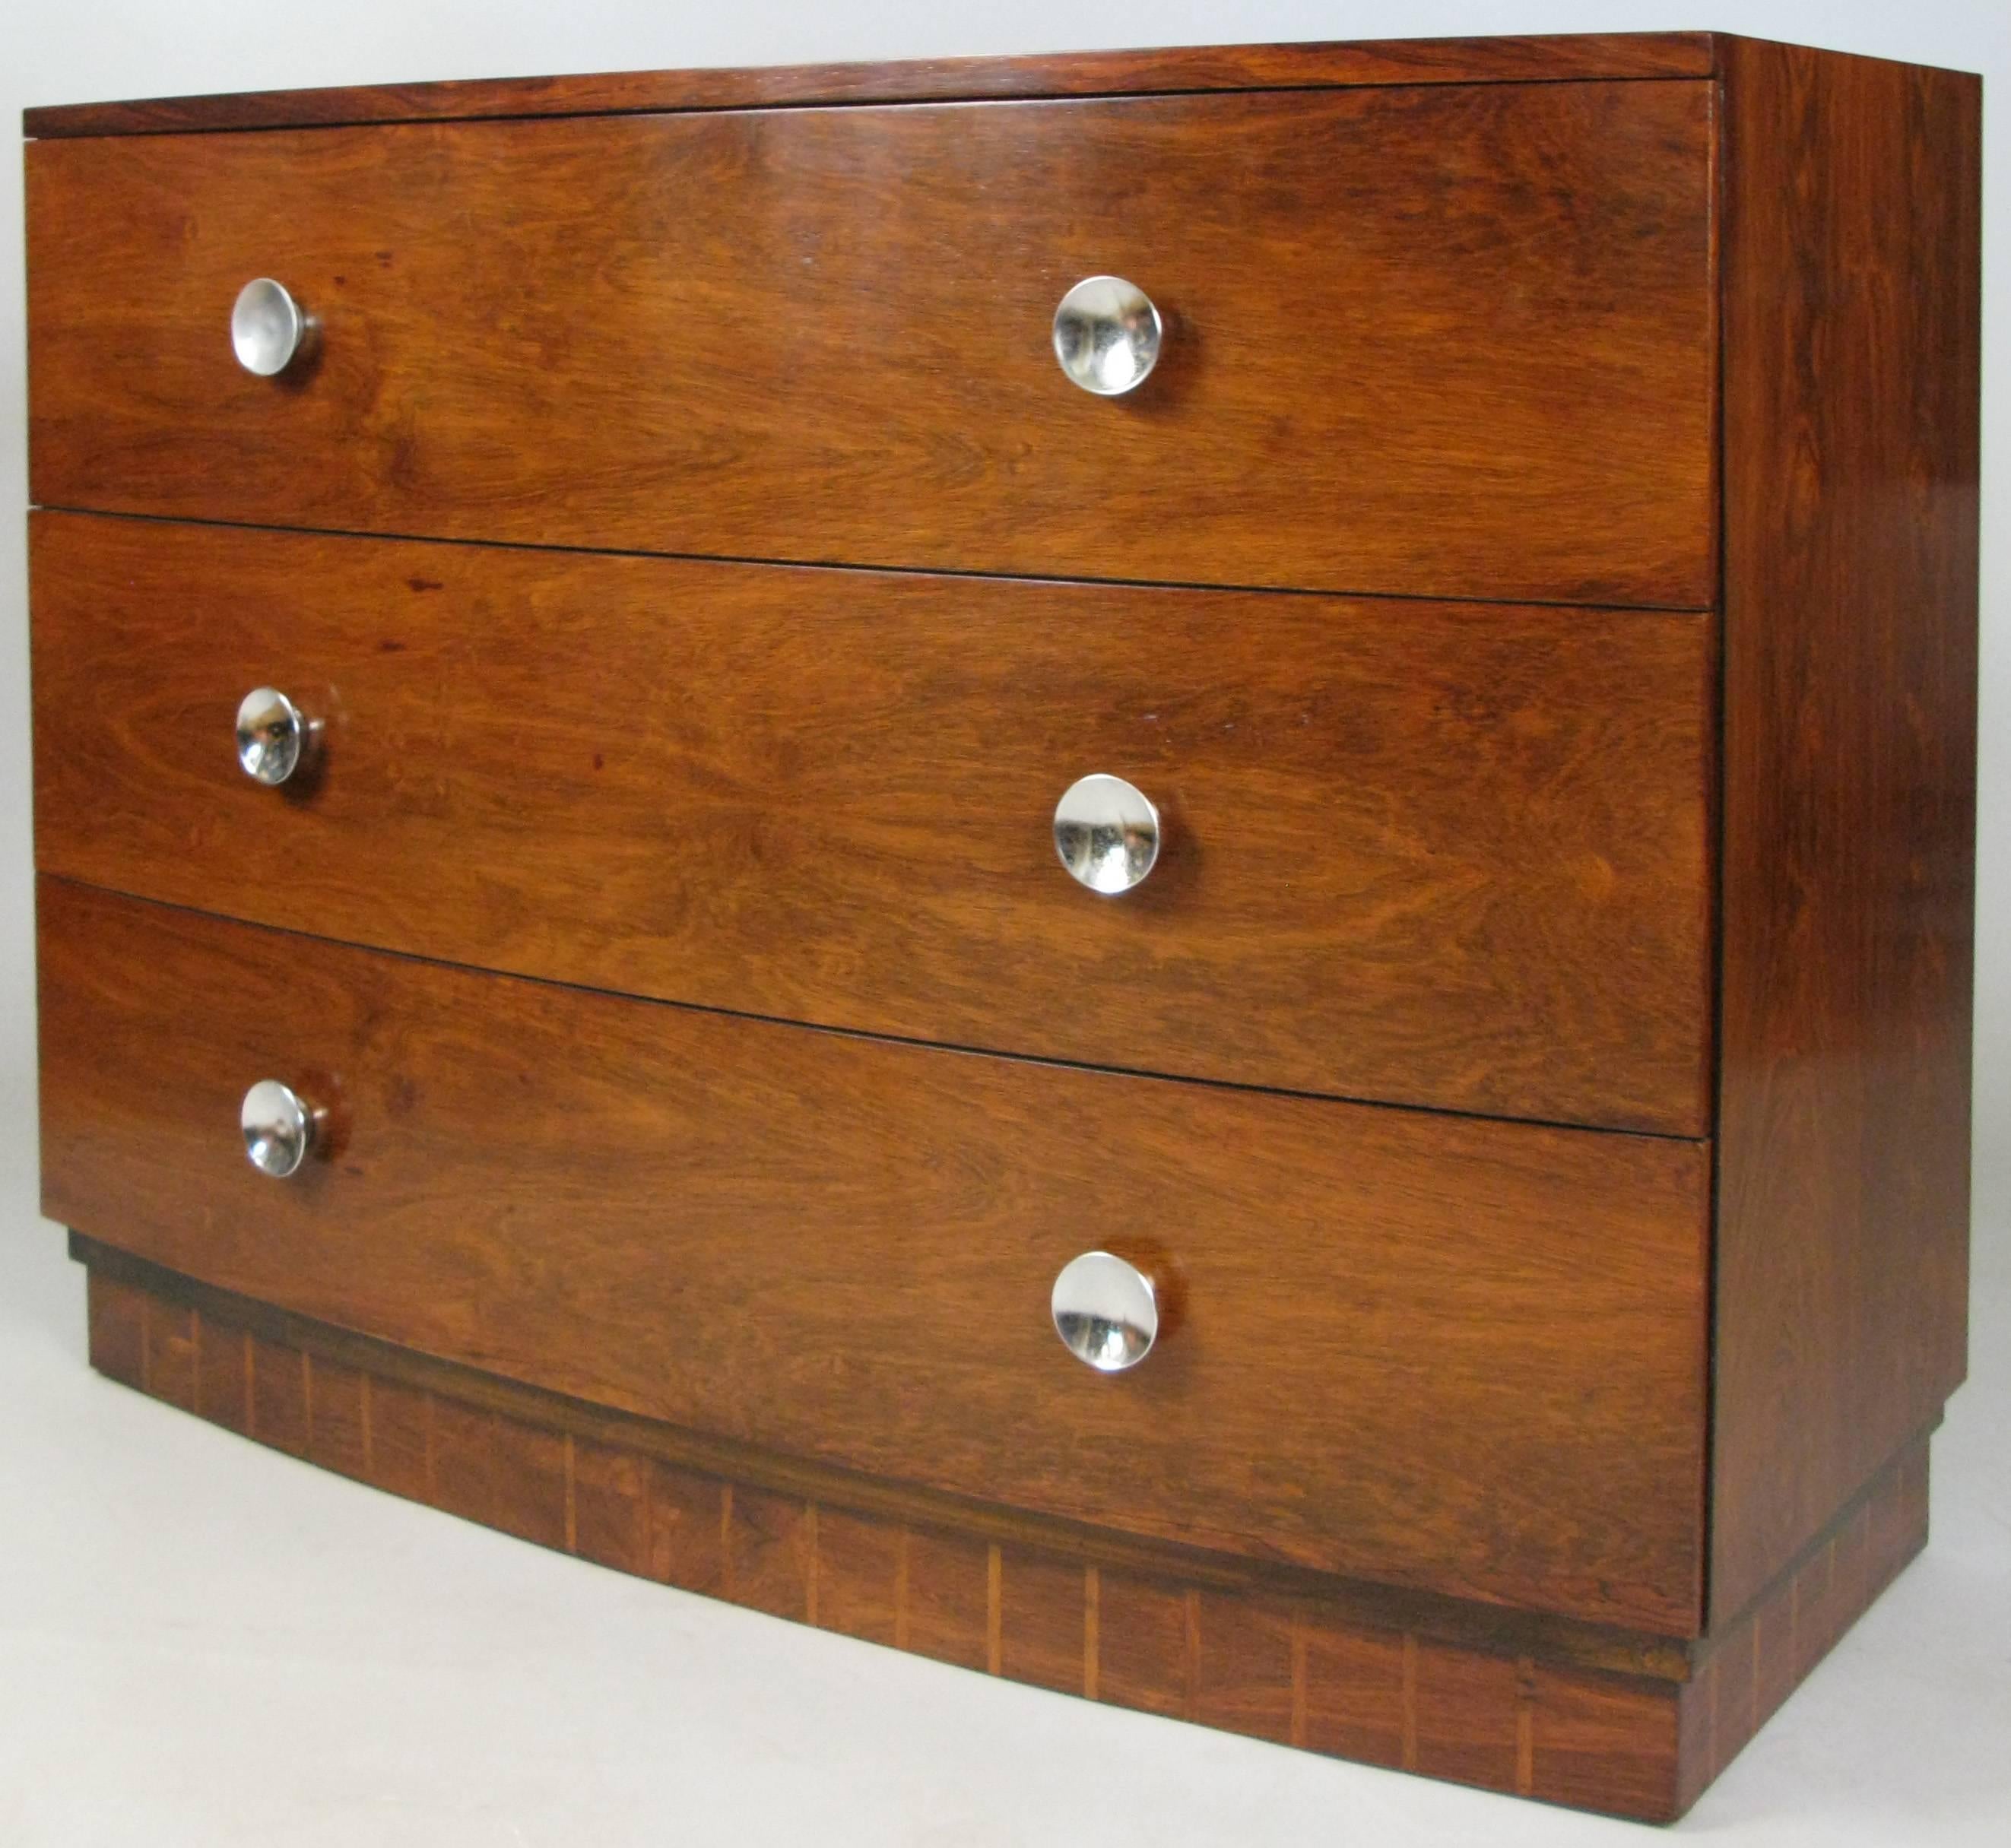 A Classic and stunning bow front rosewood three-drawer chest designed by Gilbert Rohde for Herman Miller. Raised on a recessed base with very nice detailing. Original chrome concave disc drawer pulls, and with the original small sliding valuables